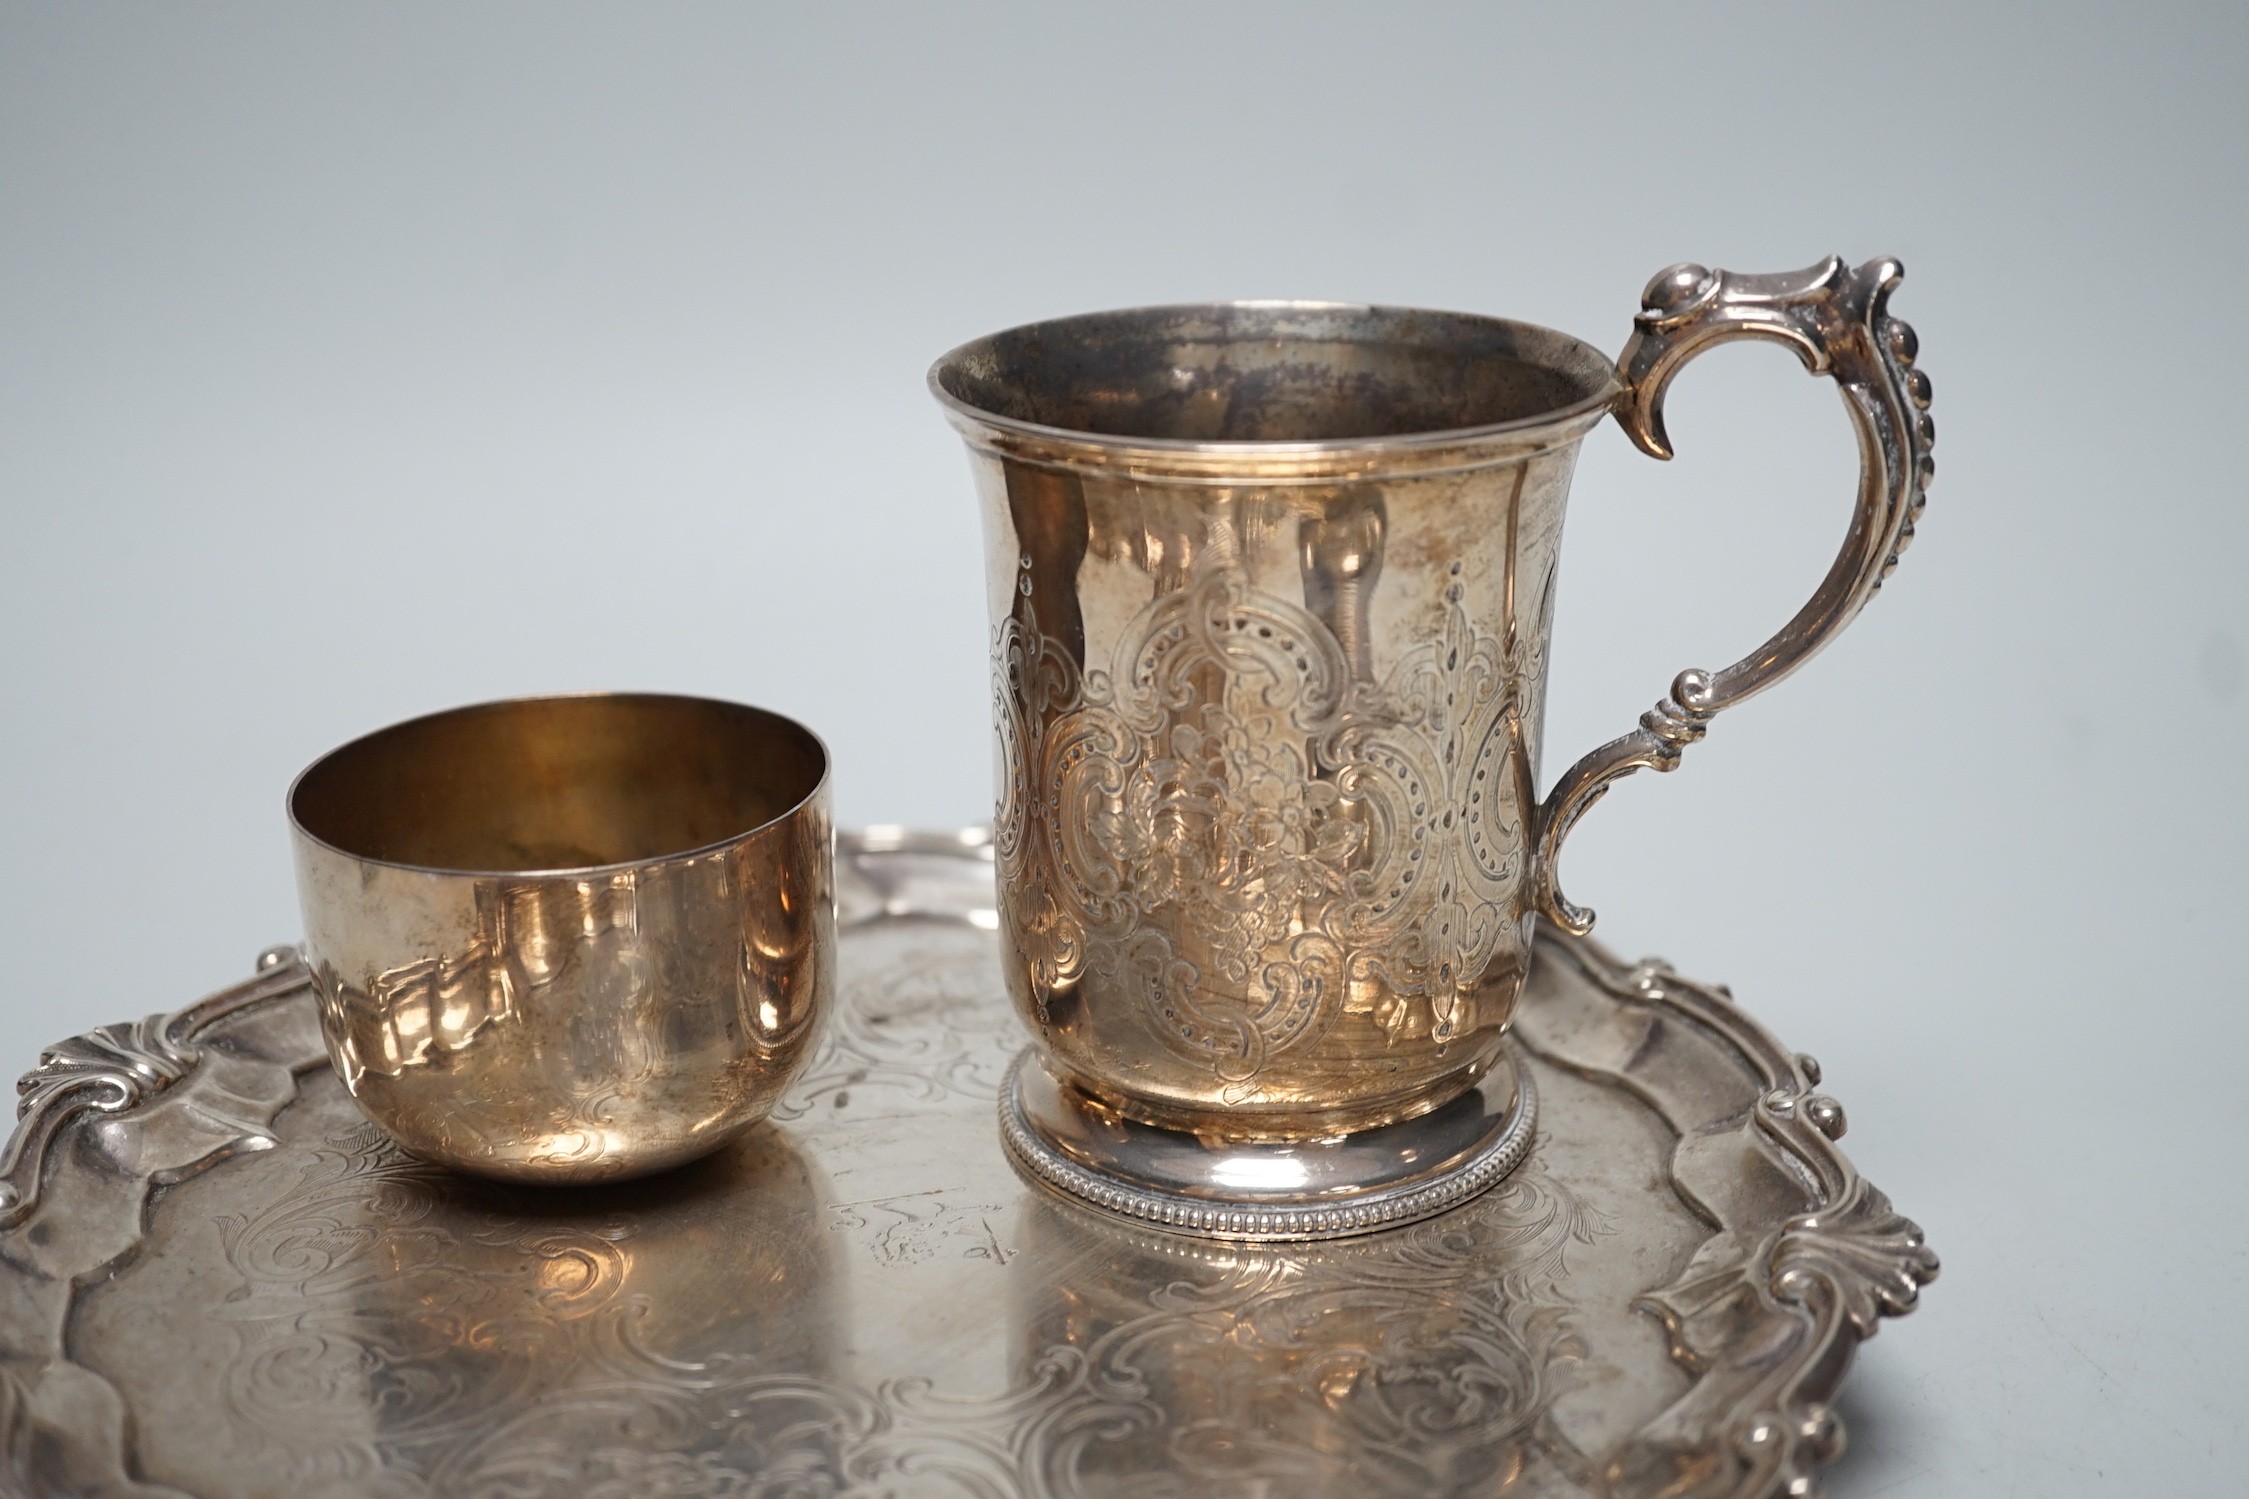 A Victorian silver salver, by The Barnards, London, 1847, 23.1cm, together with a chased silver christening cup, a presentation pin dish, a further novelty dish in the form of a bonnet and a George III silvetr tumbler cu